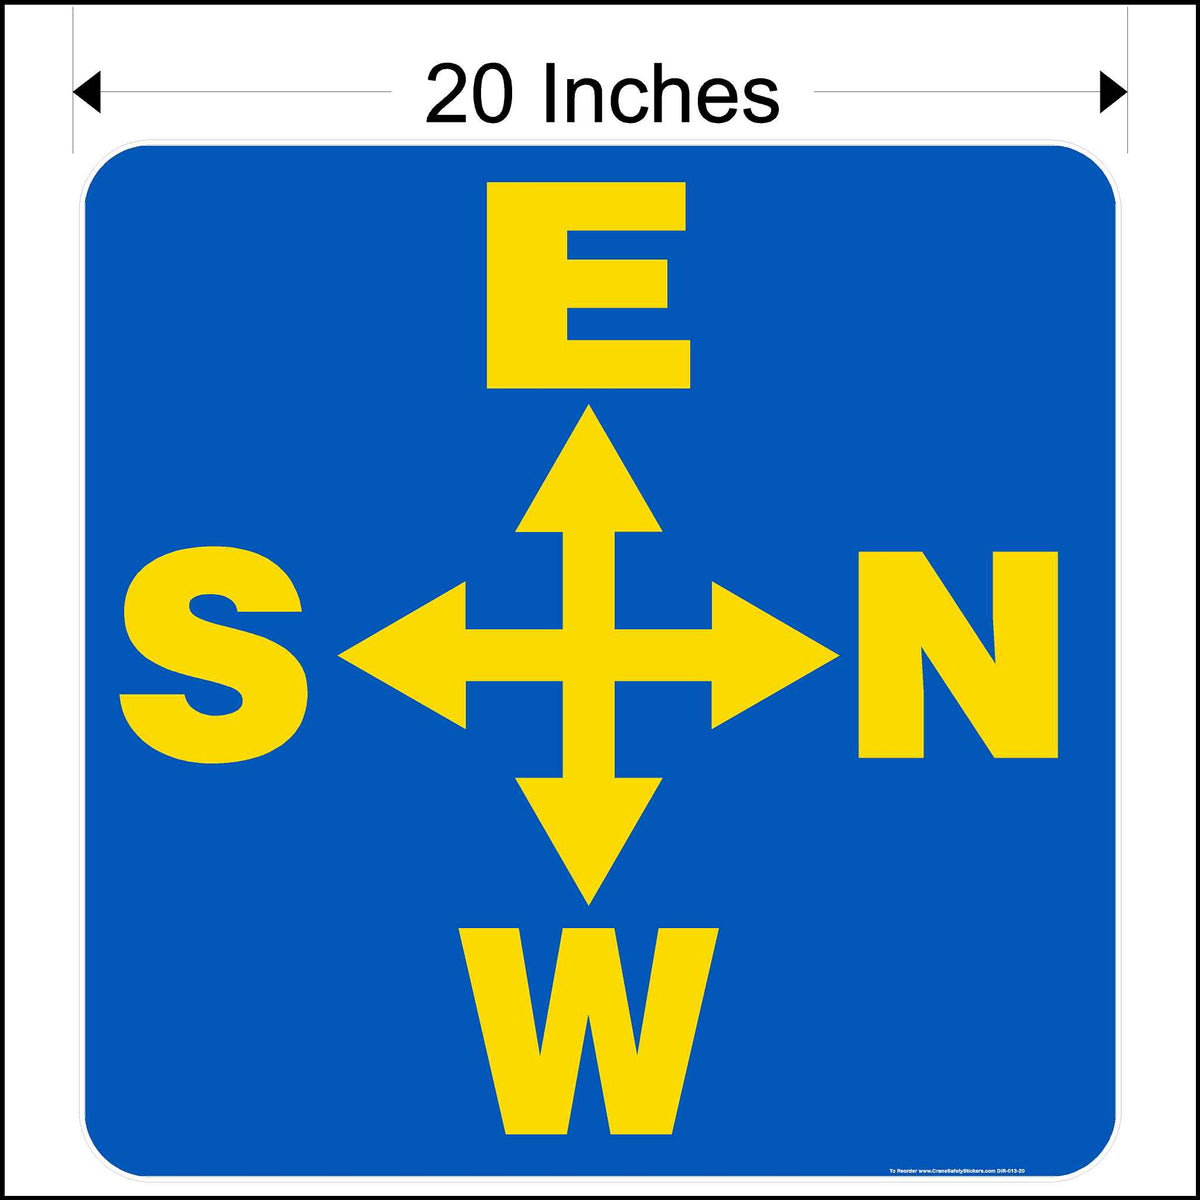 Overhead crane directional decal printed in blue and yellow measuring 20 inches square.